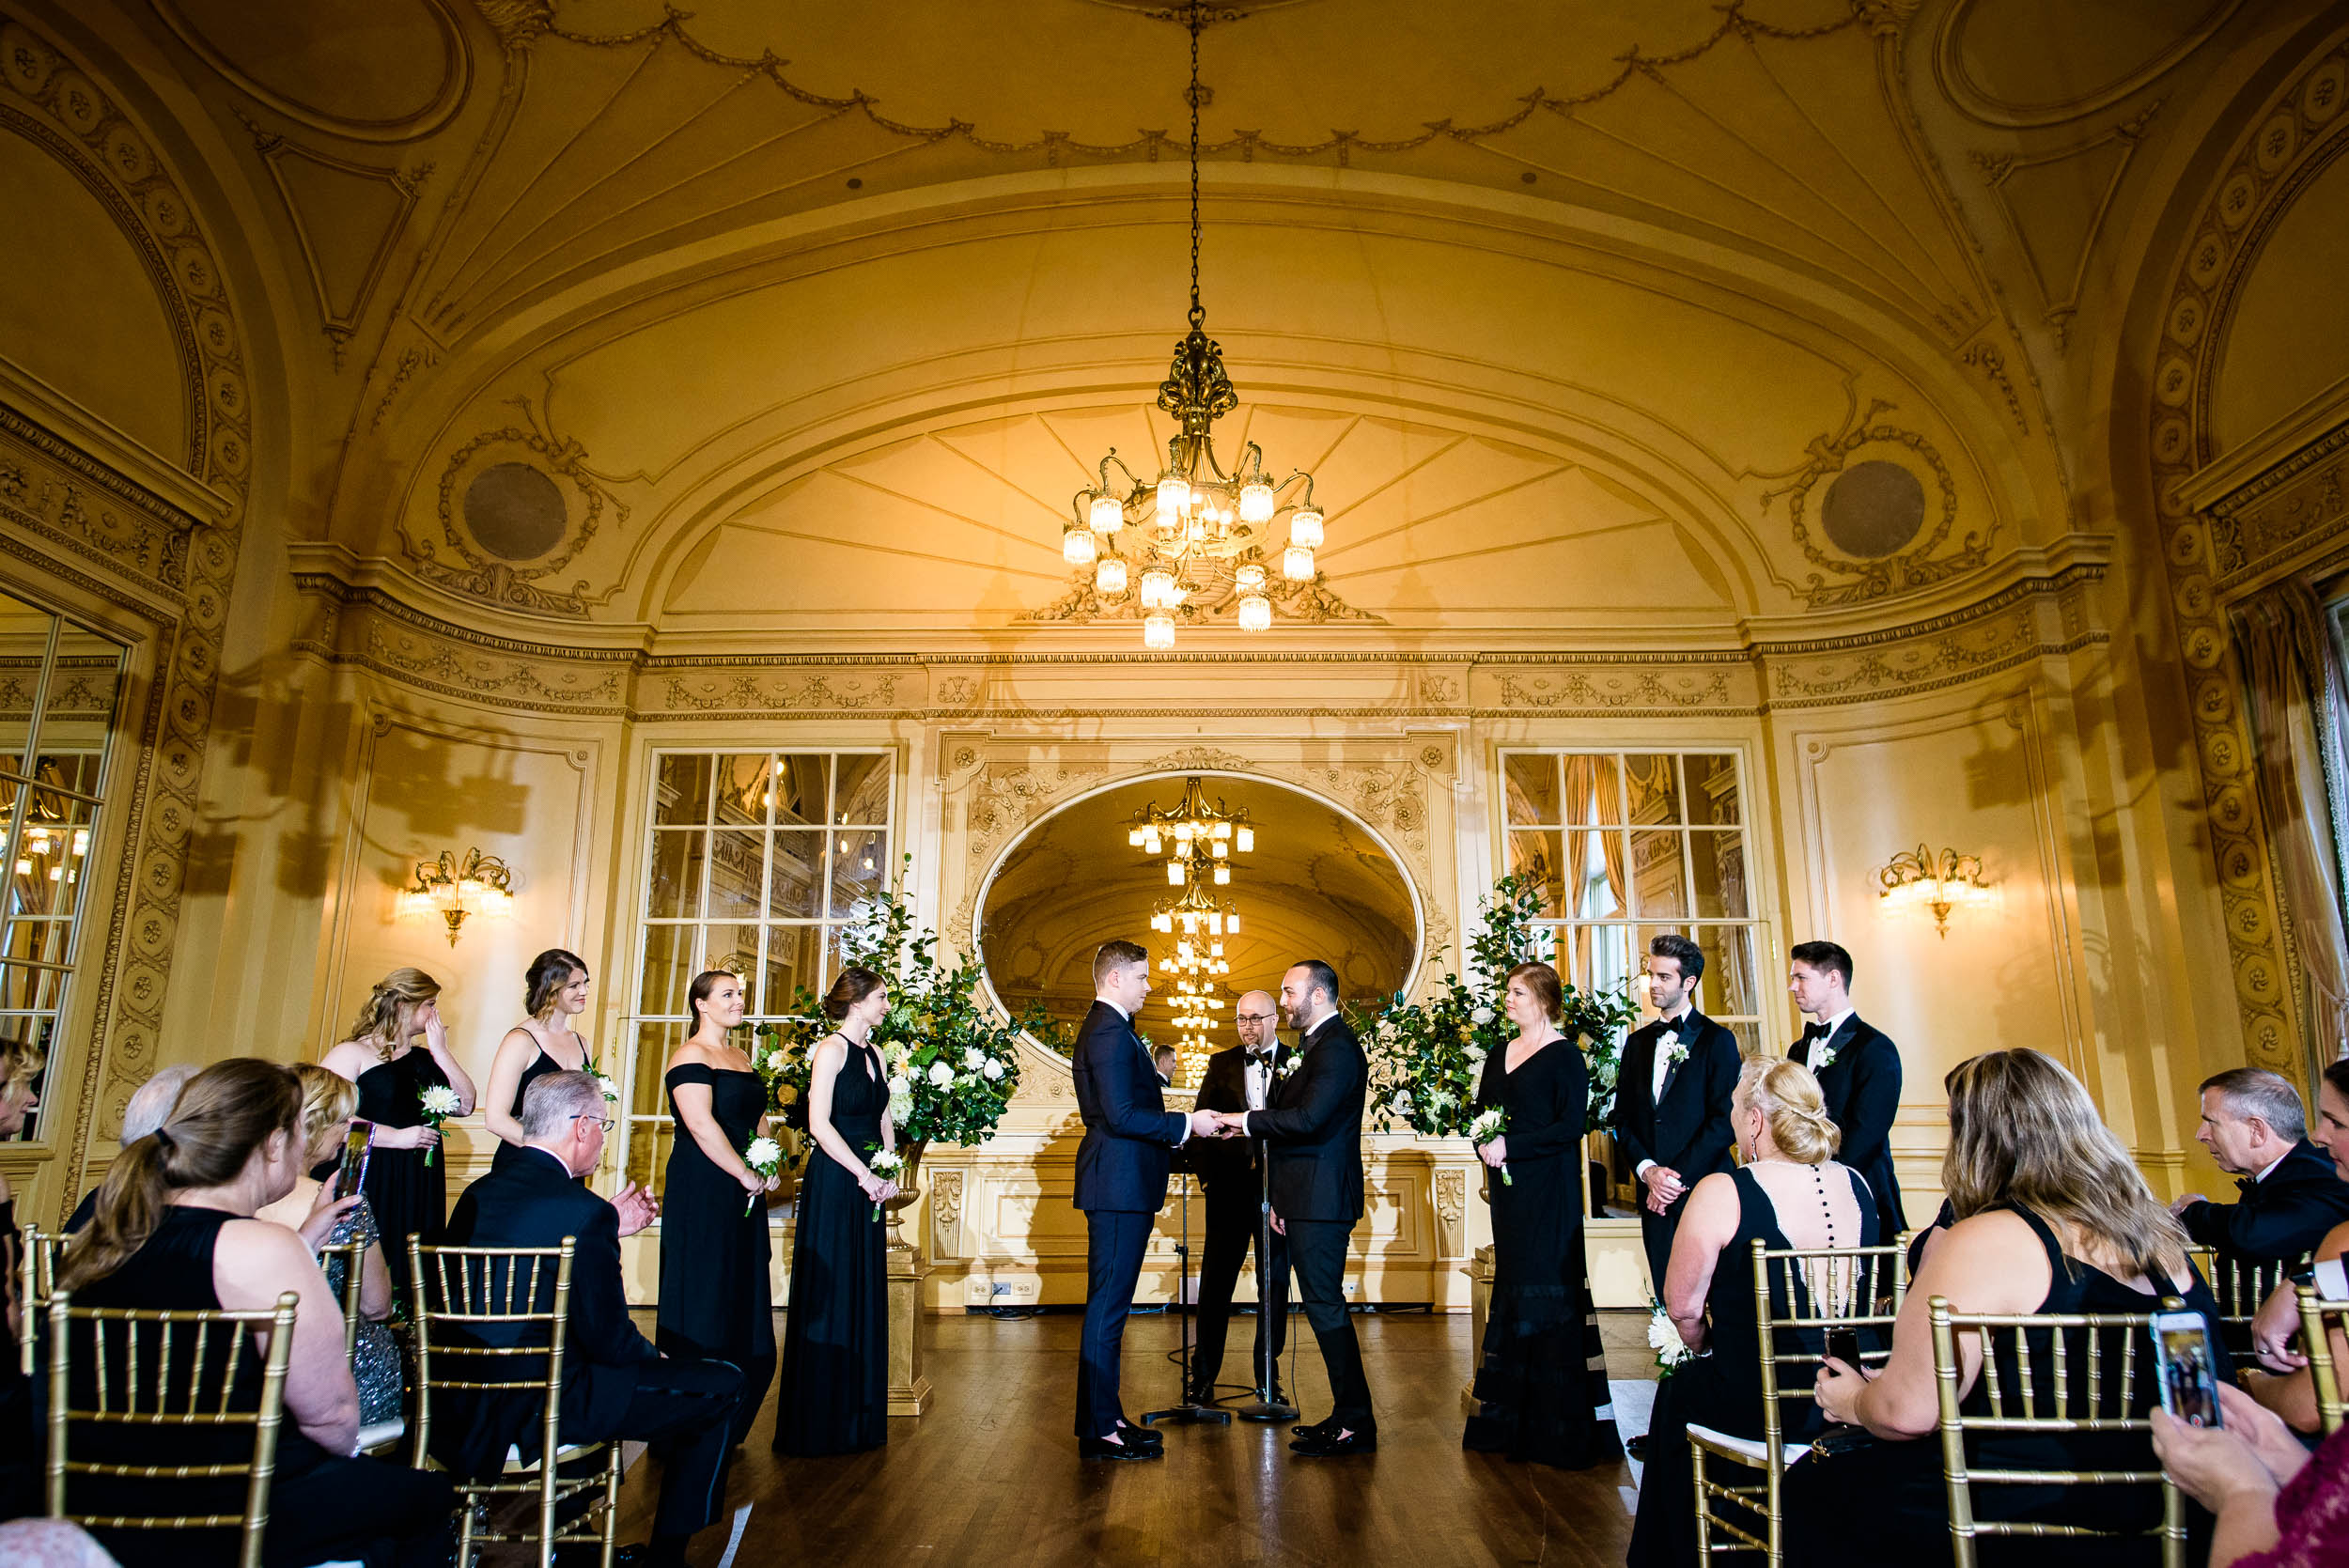 Grooms exchange their vows for luxurious fall wedding at the Chicago Symphony Center captured by J. Brown Photography. See more wedding ideas at jbrownphotography.com!